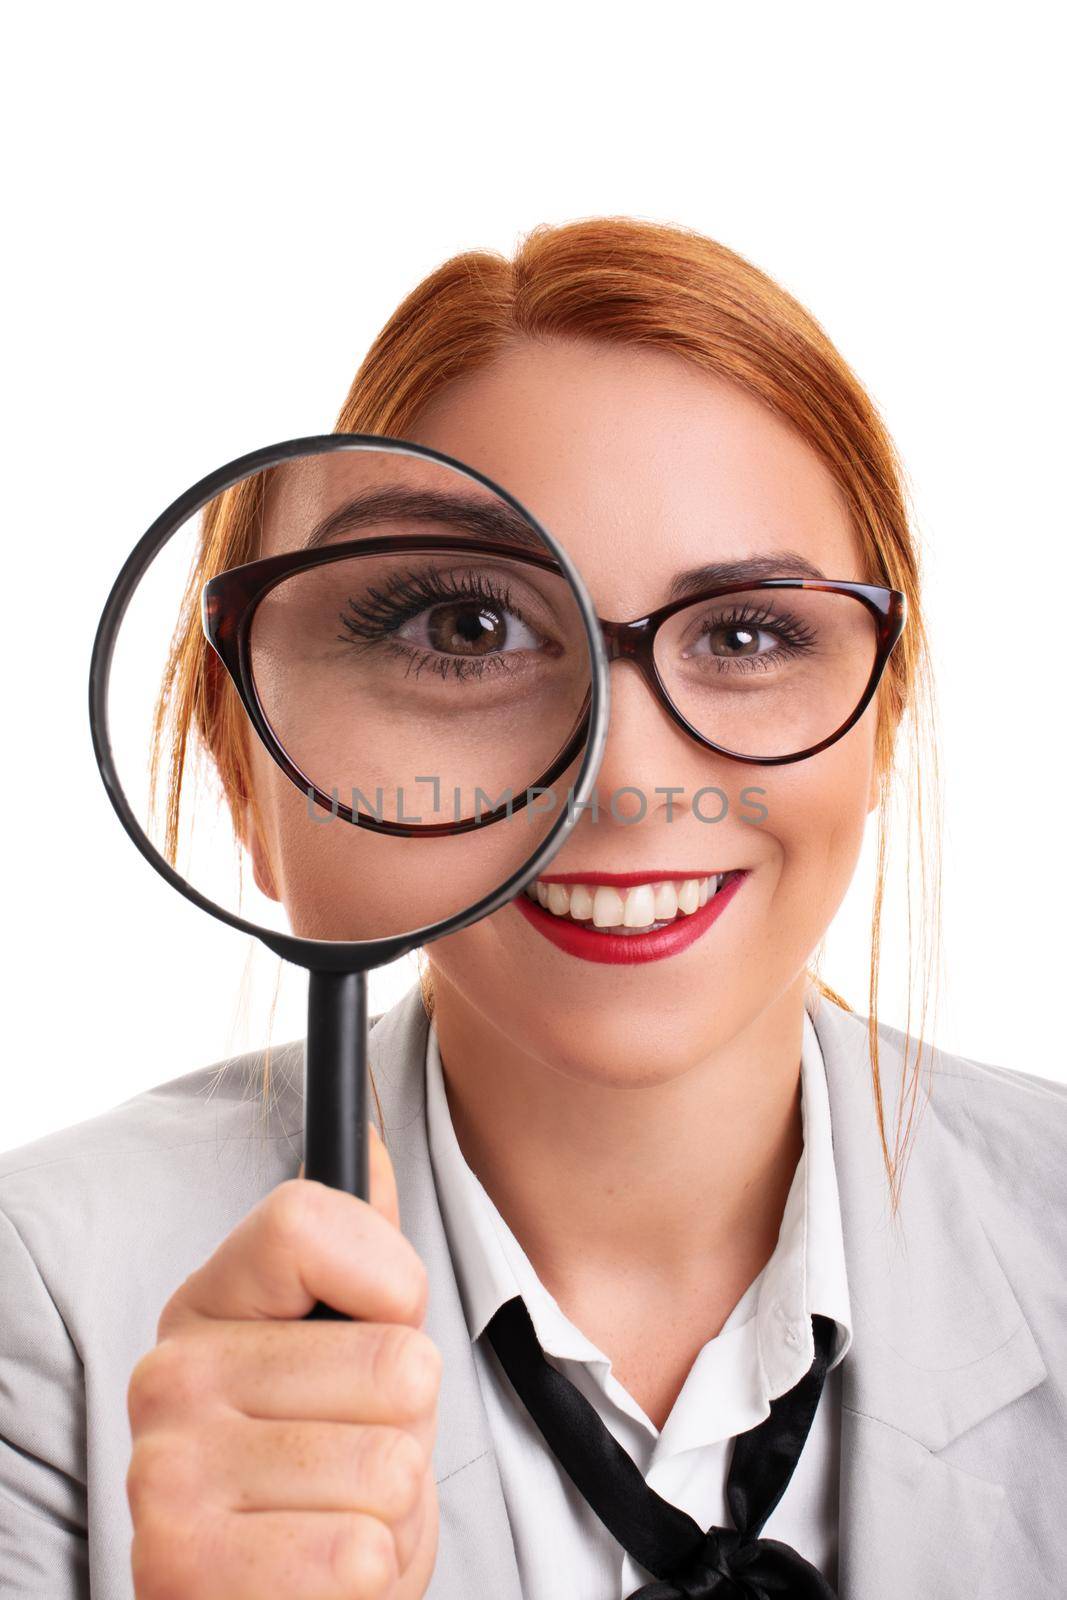 Close up of a beautiful young businesswoman smiling and looking through magnifying glass, isolated on white background. Analysis, scrutiny concept.